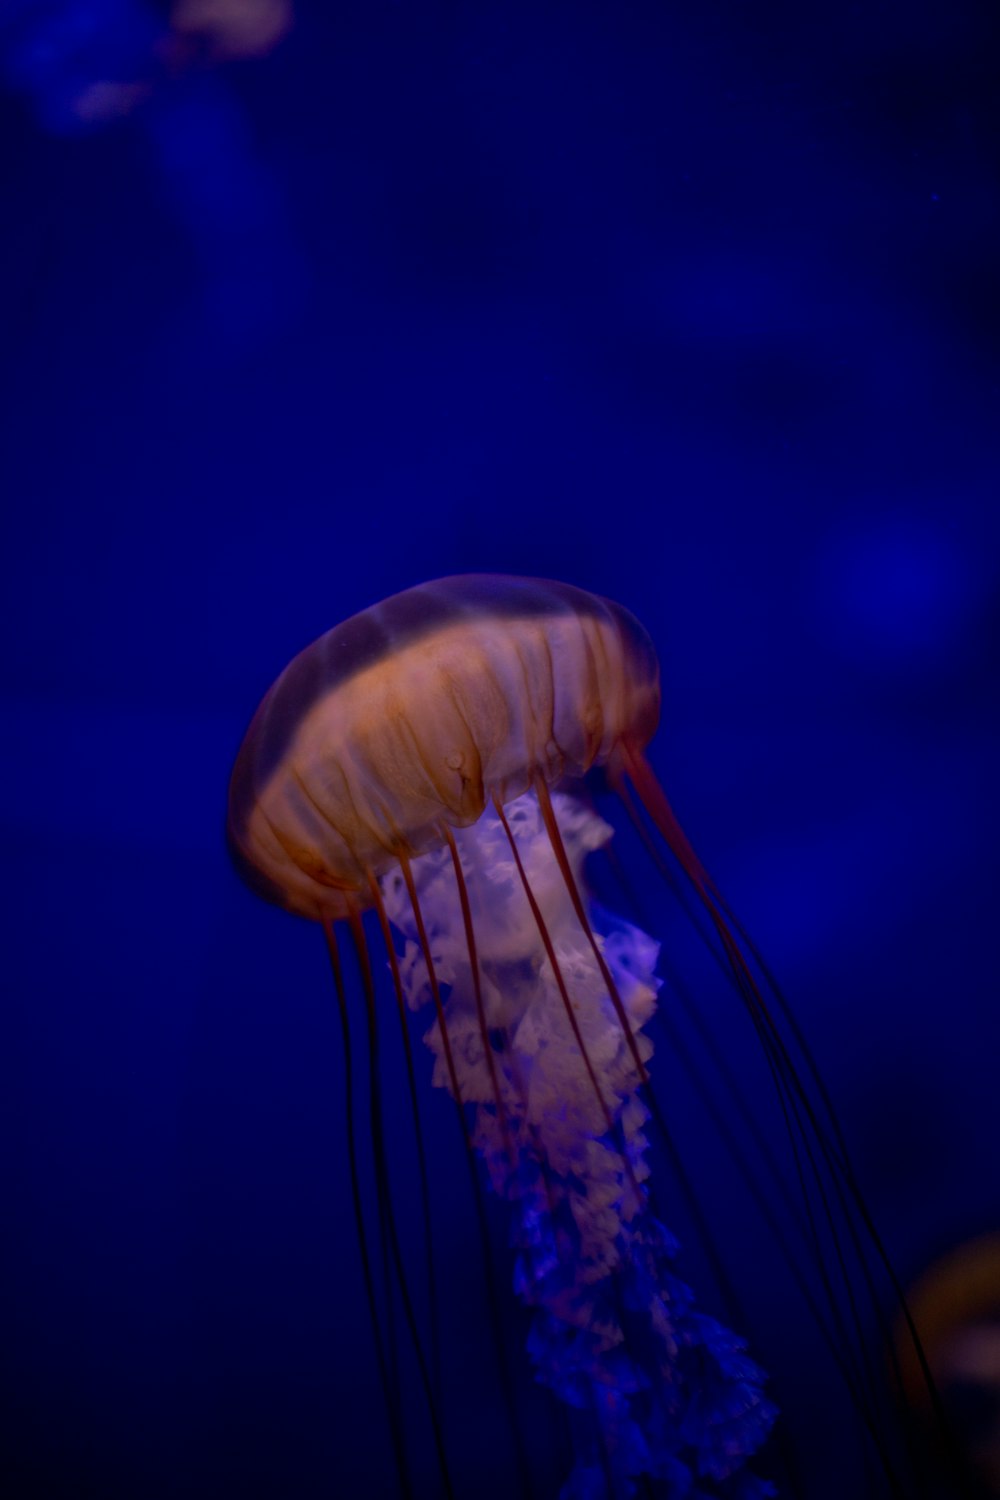 a jellyfish swimming in the water at night